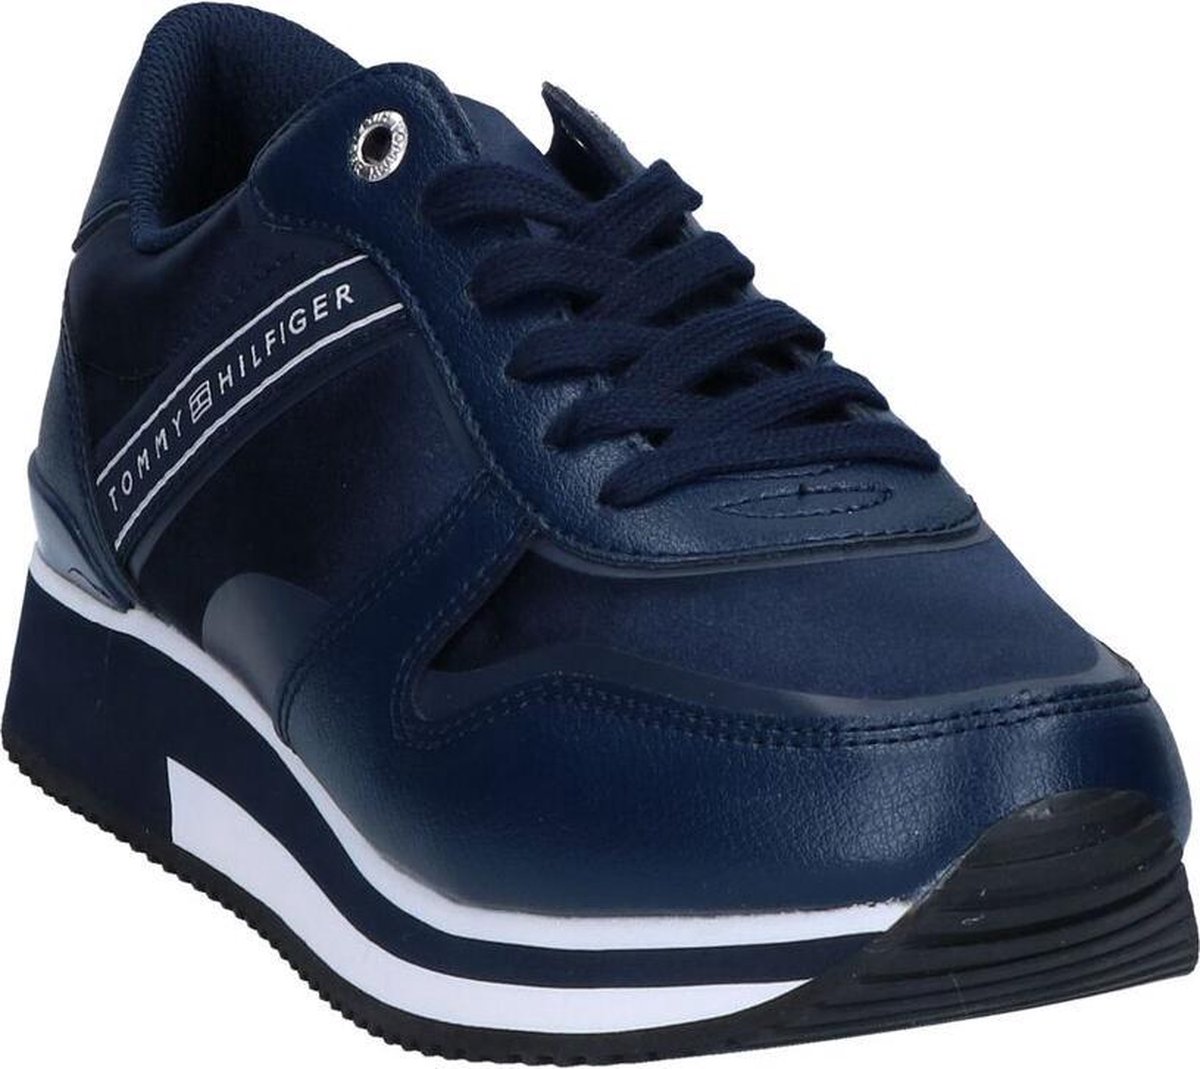 Tommy Hilfiger Mixed Active City Blauwe Sneakers Dames 37 | bol.com